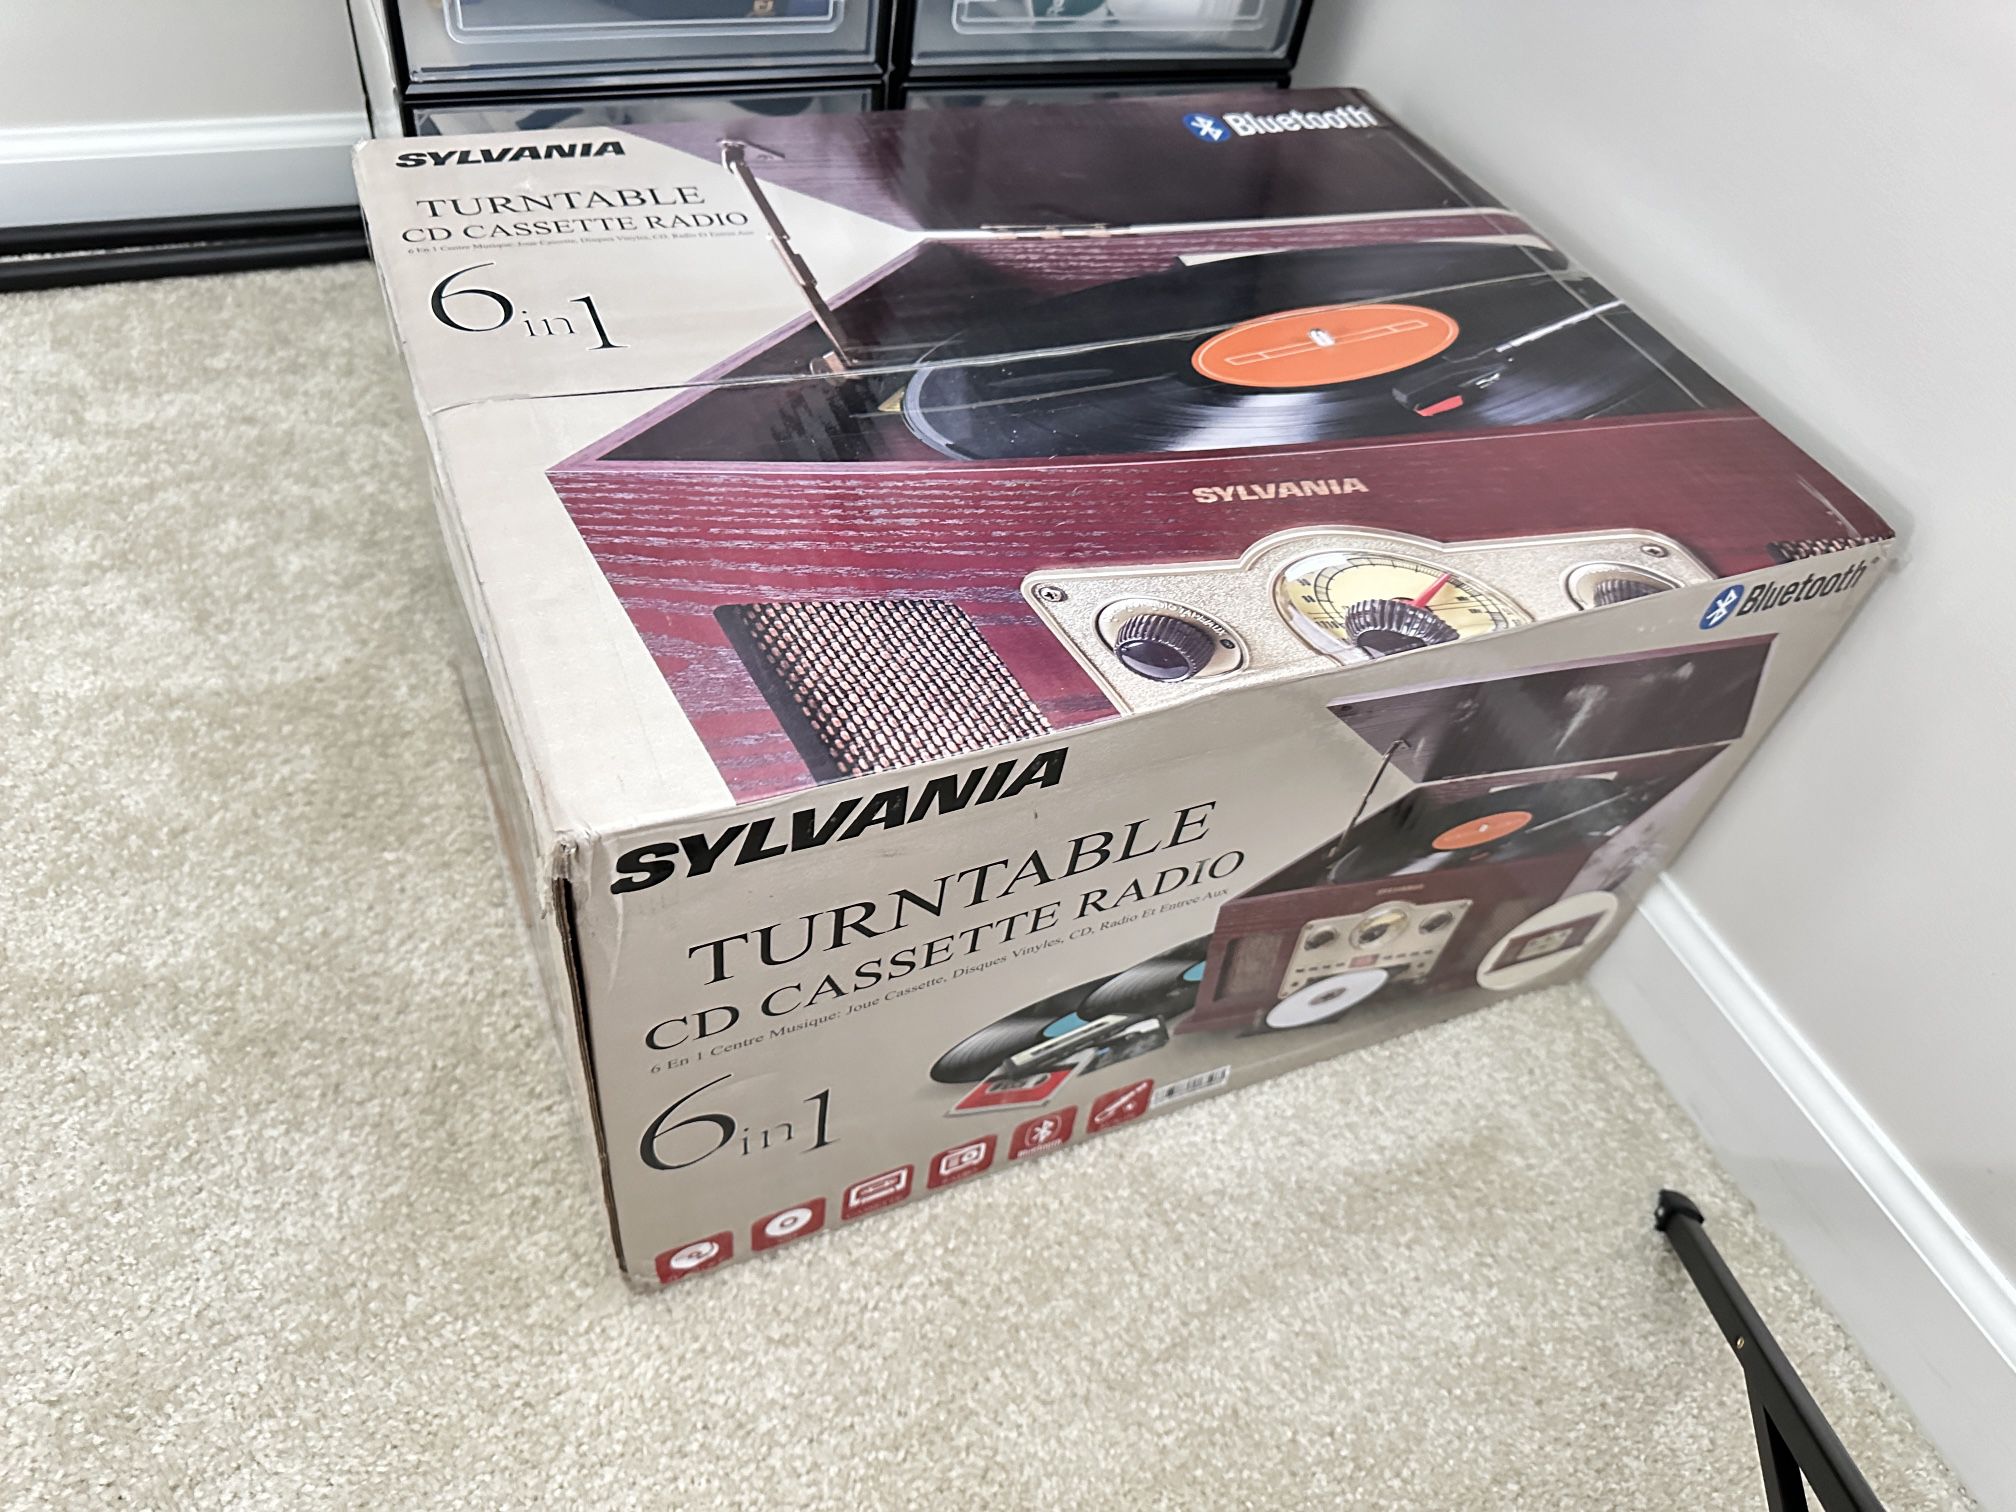 Turntable Record Player 6 In 1